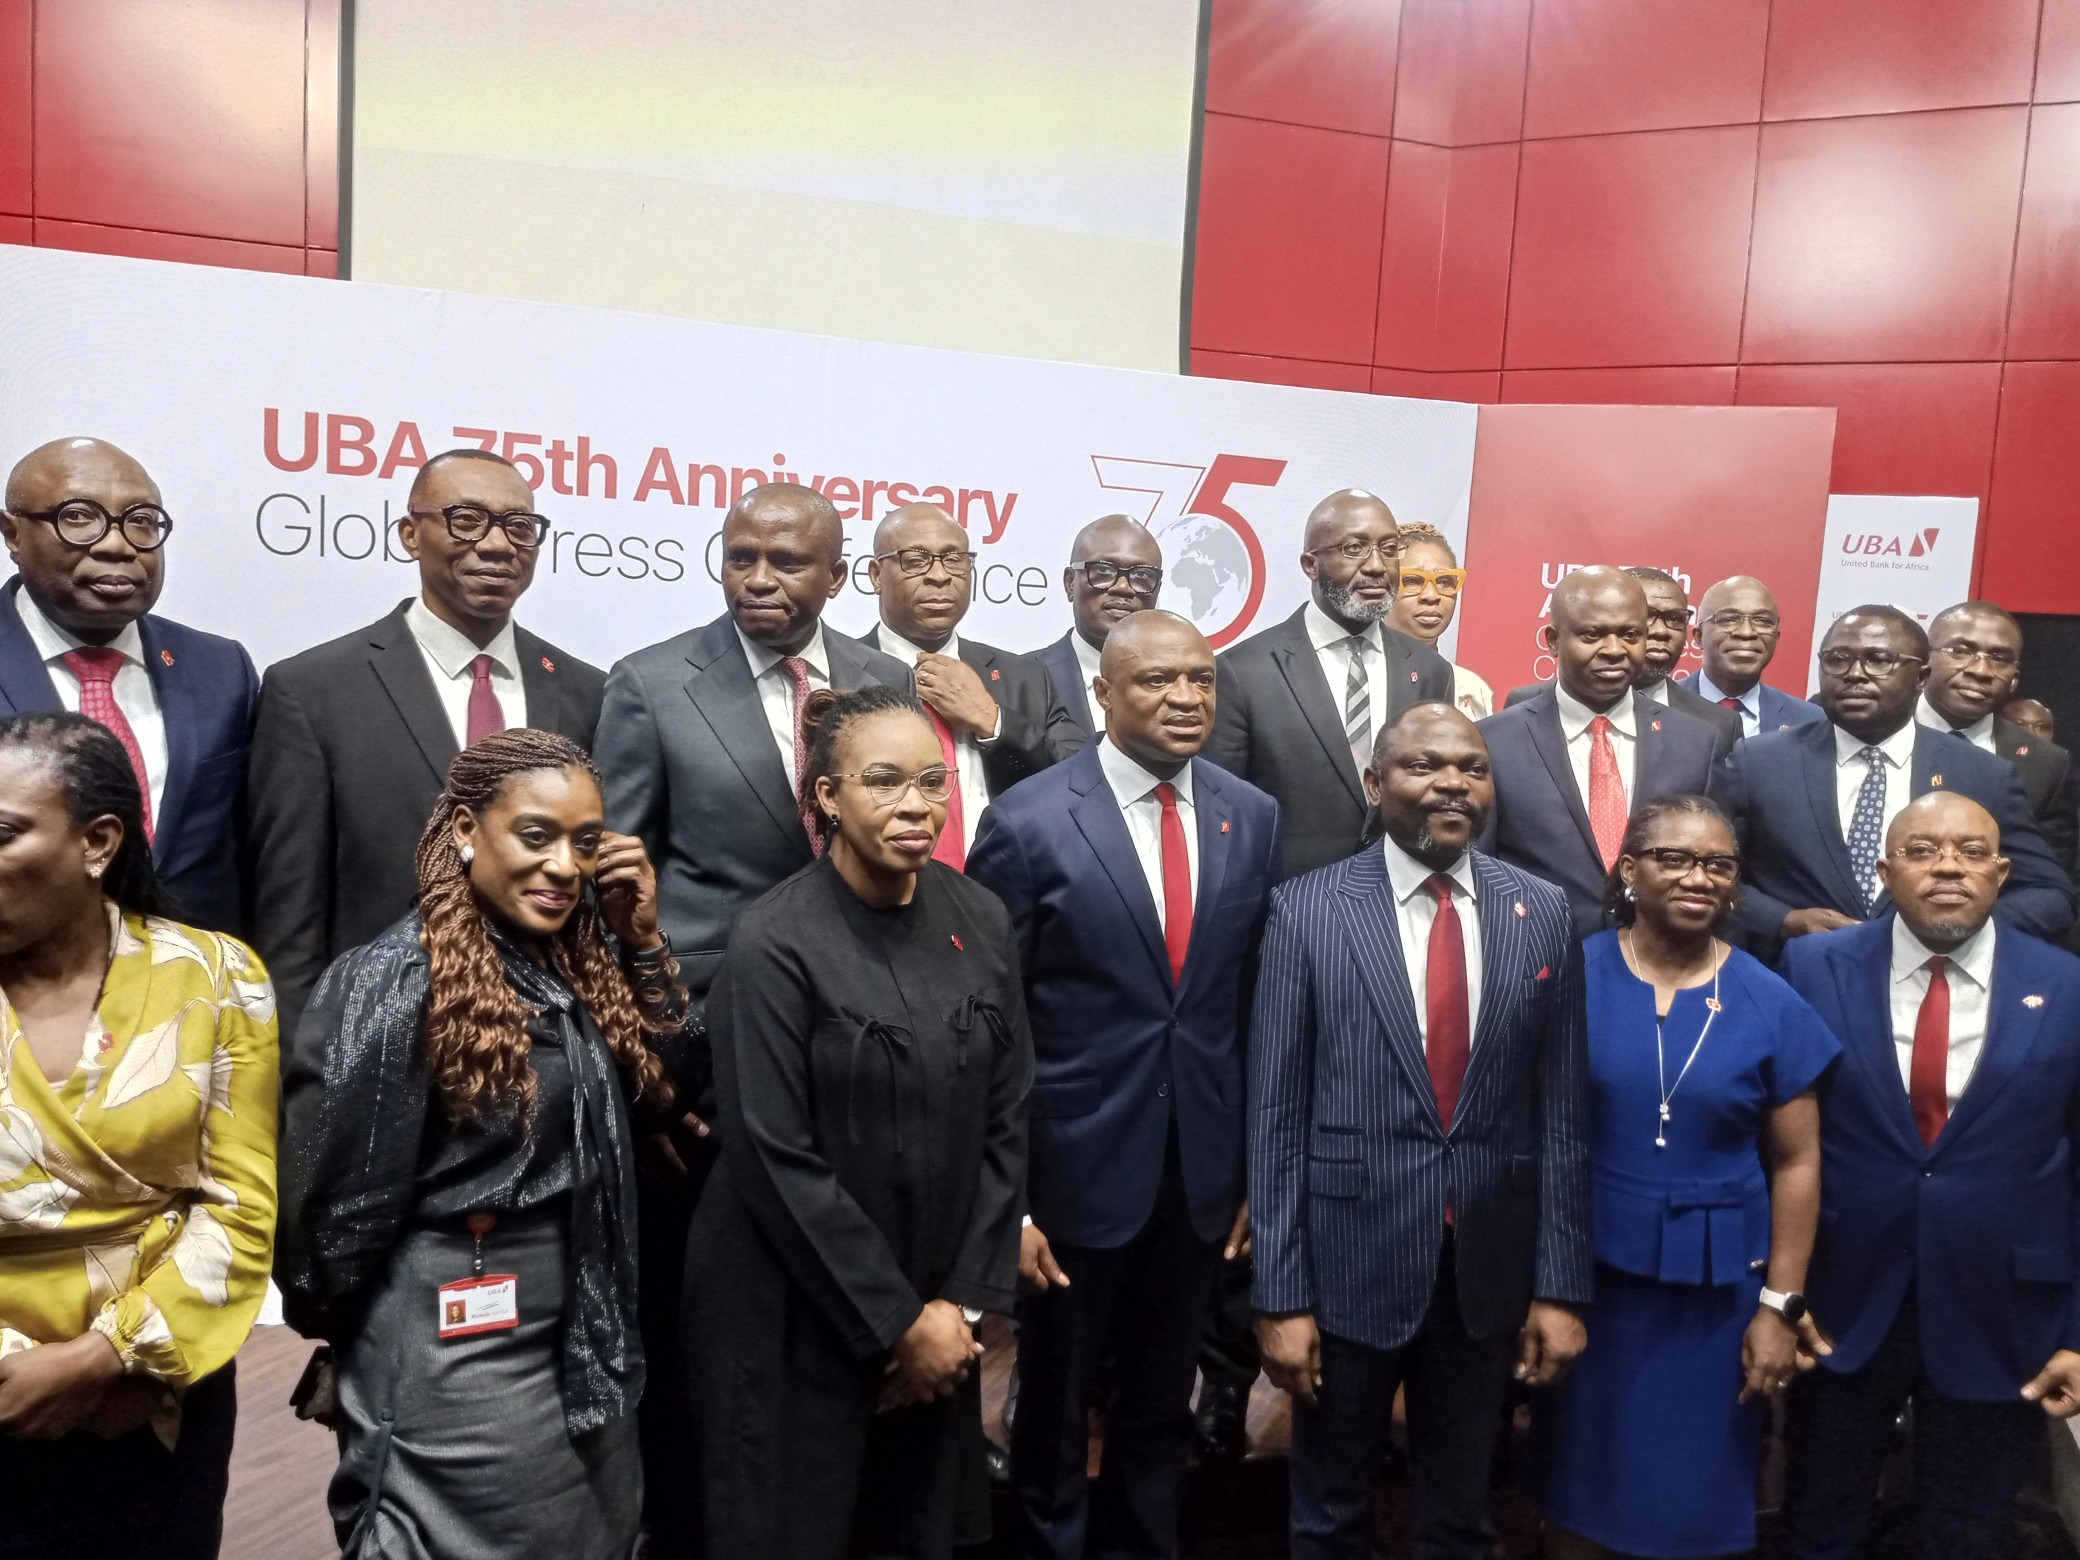 UBA Counts Achievements At 75, Envisions To Be Role Model For African Businesses